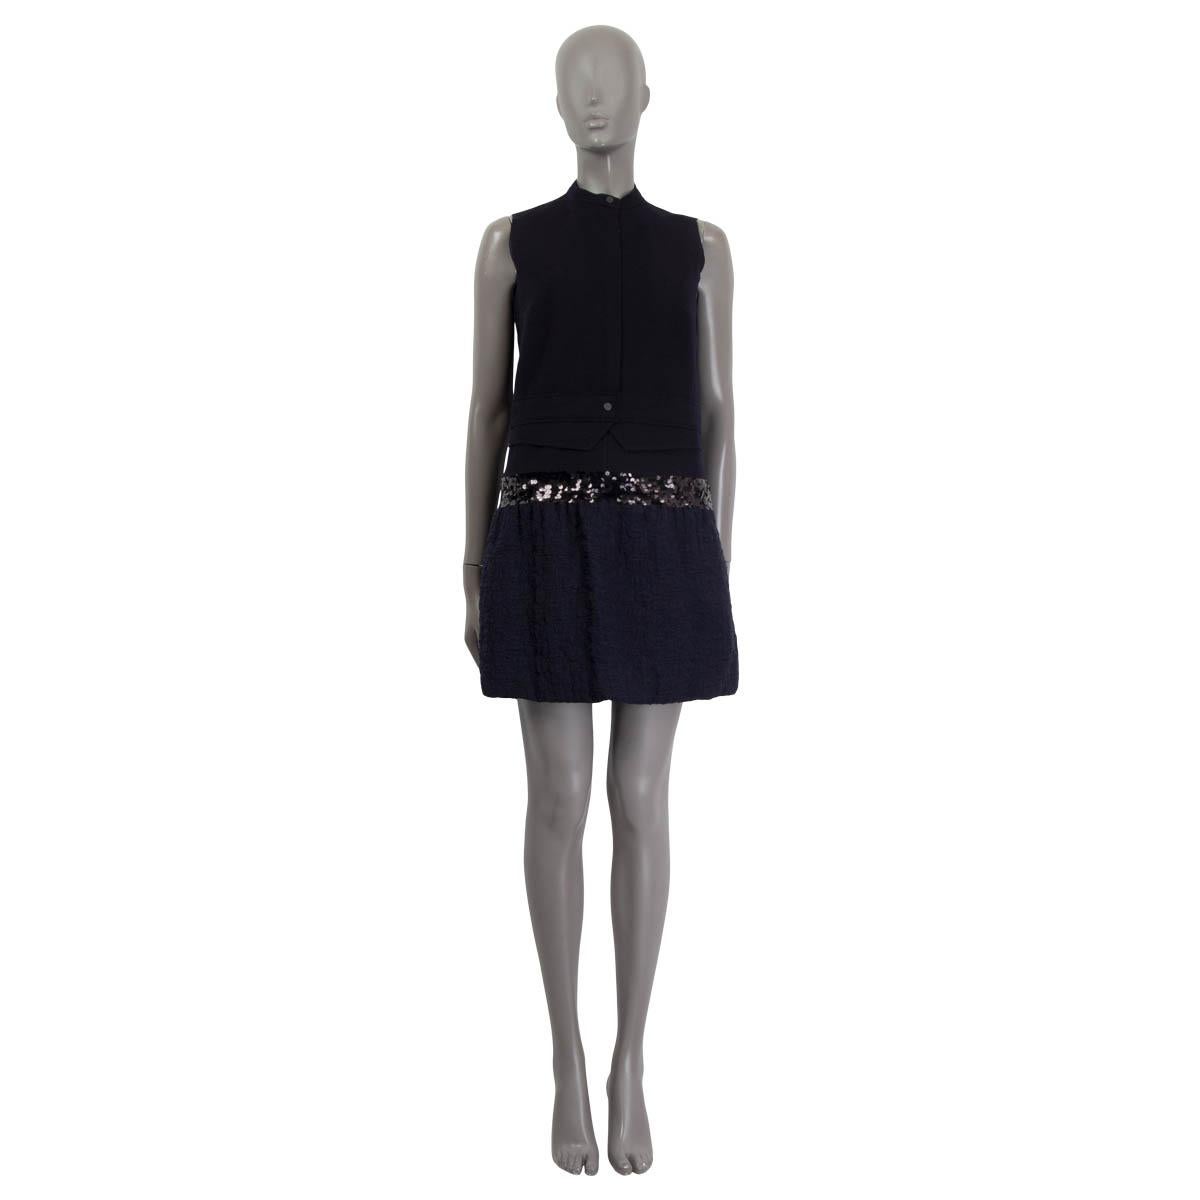 100% authentic Victoria Victoria Beckham sleeveless dress in navy blue wool and nylon. Features sequin embellishments and a flared skirt. Opens with a zipper and a button on the front and a zipper on the side. Lined in navy blue polyester (65%) and